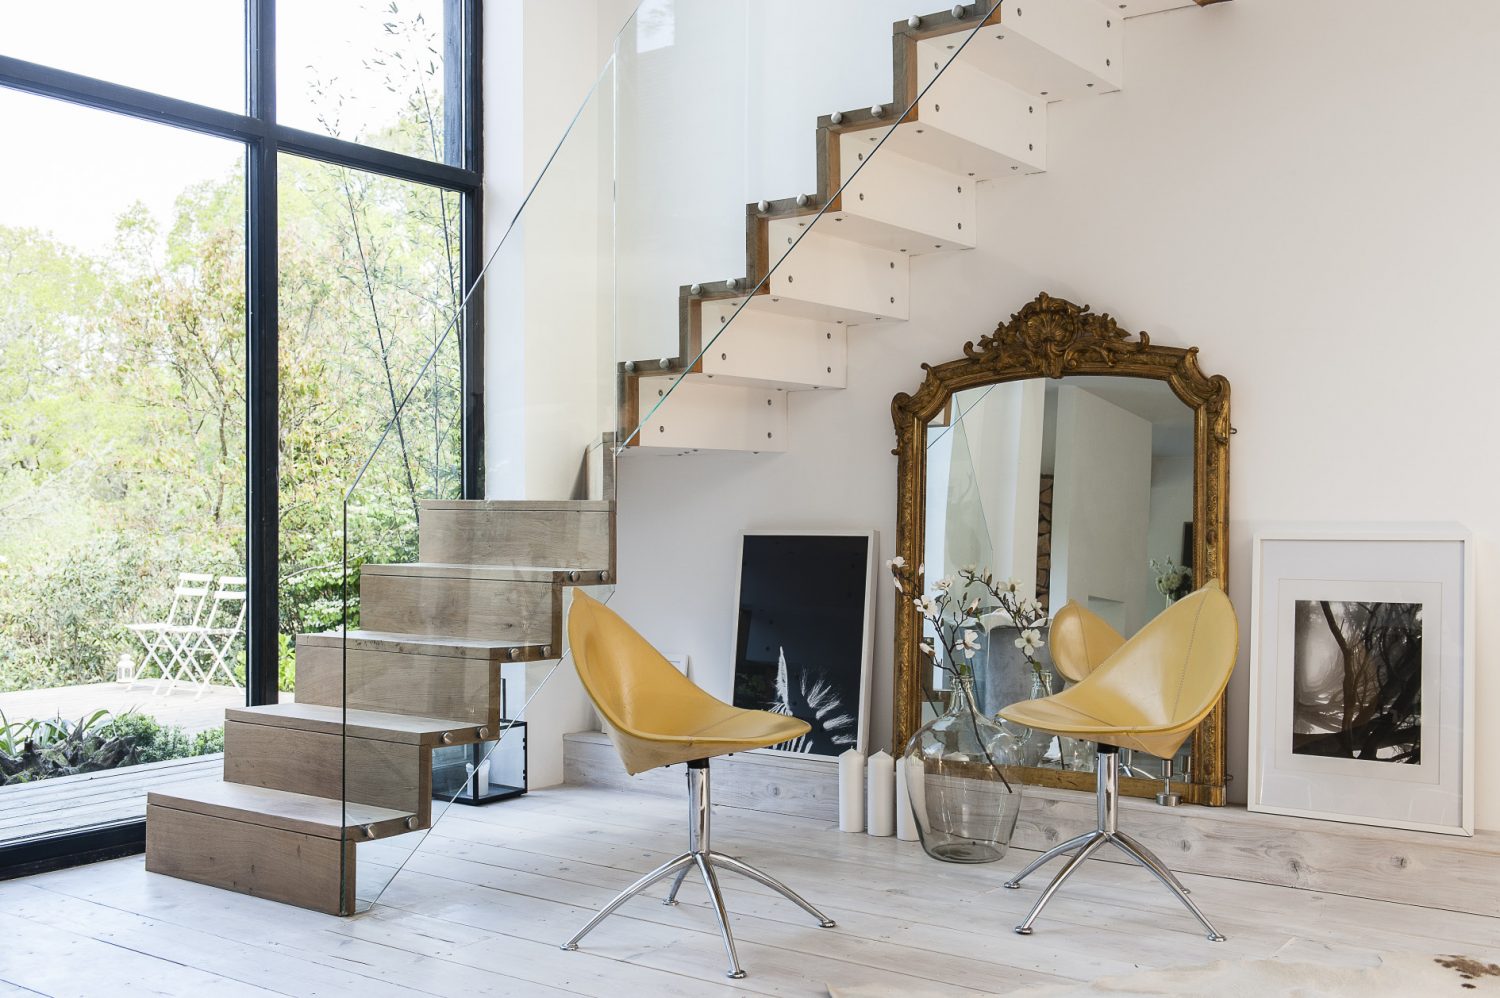 Designed by Sue together with Roy, a talented steel fabricator, the staircase is crafted from steel and encased in green oak with glass balustrading